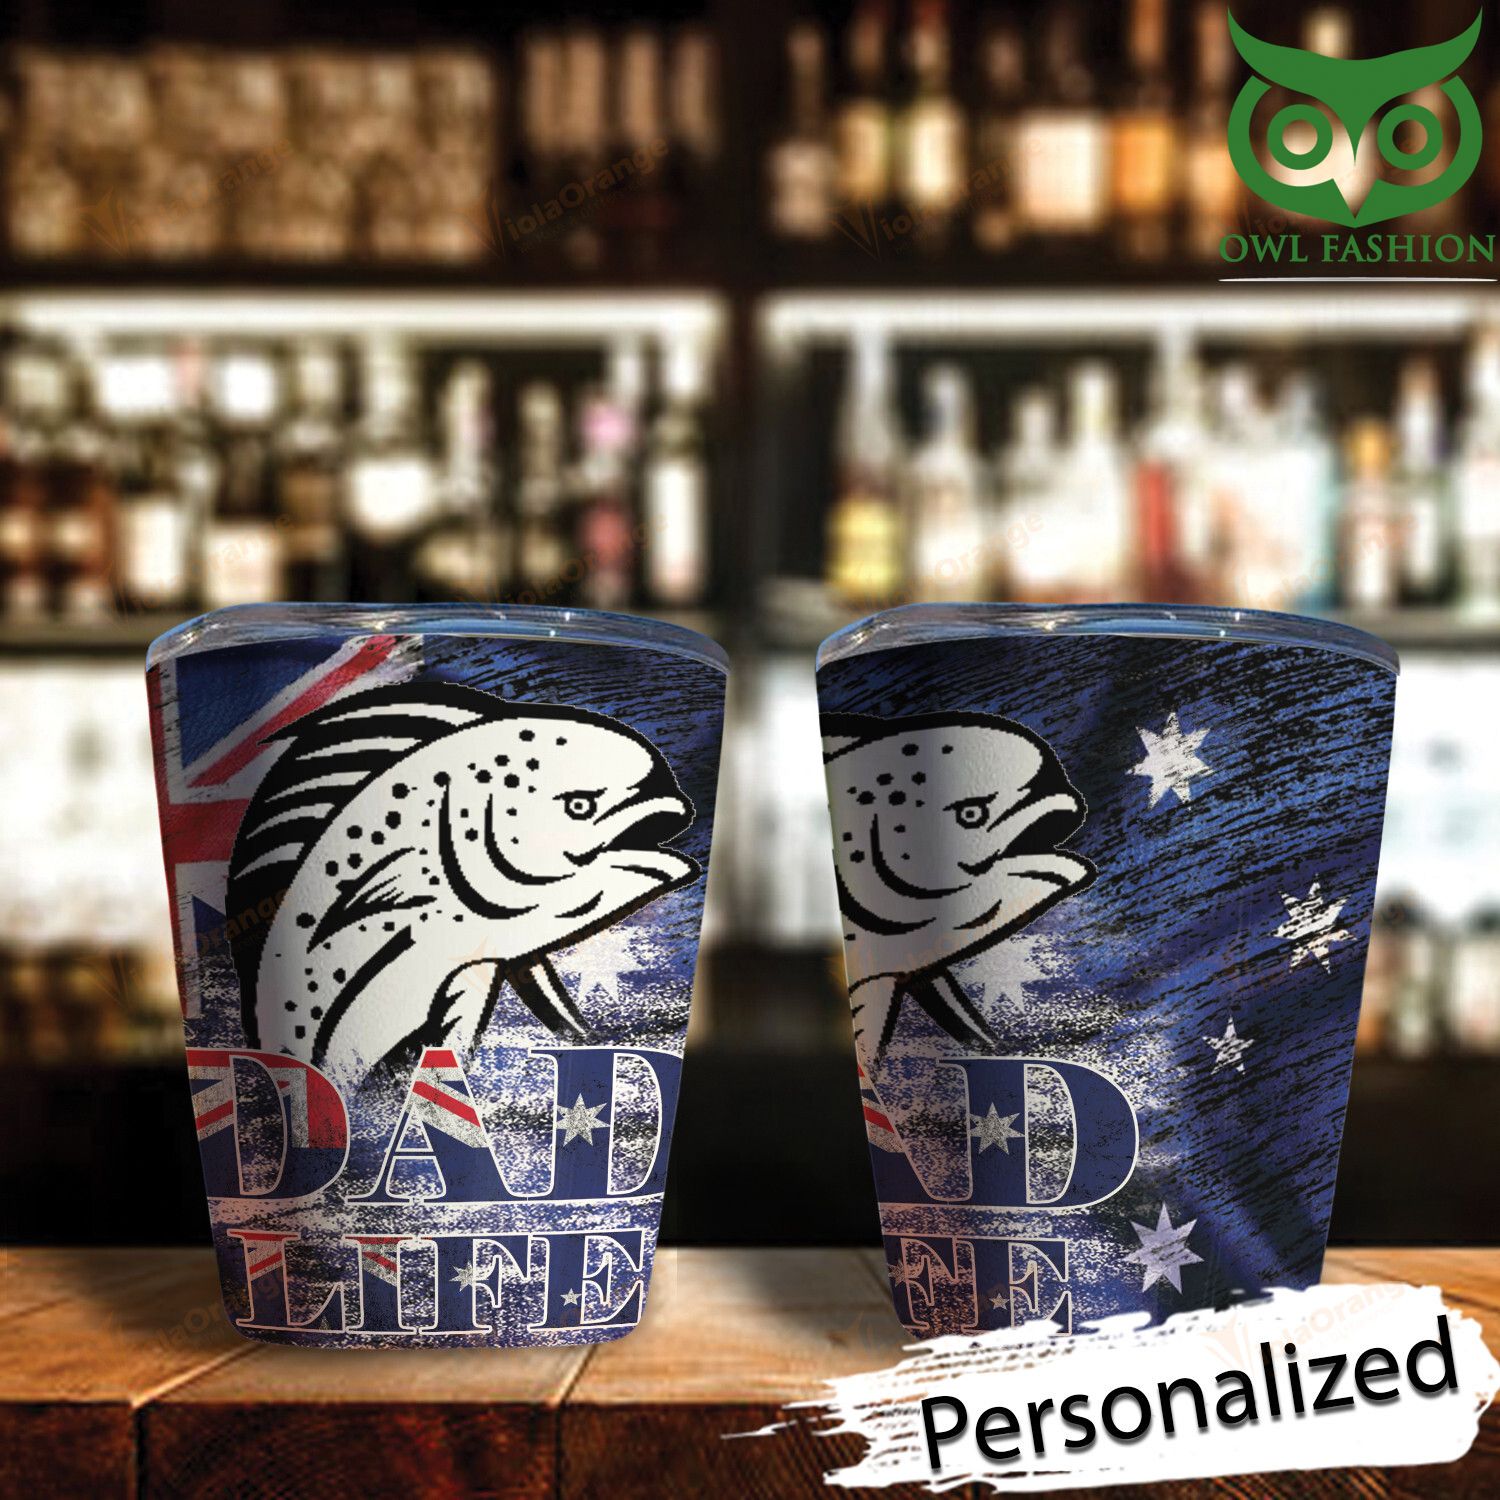 59 Aus Fishing customized stainless steel tumbler cup special edition